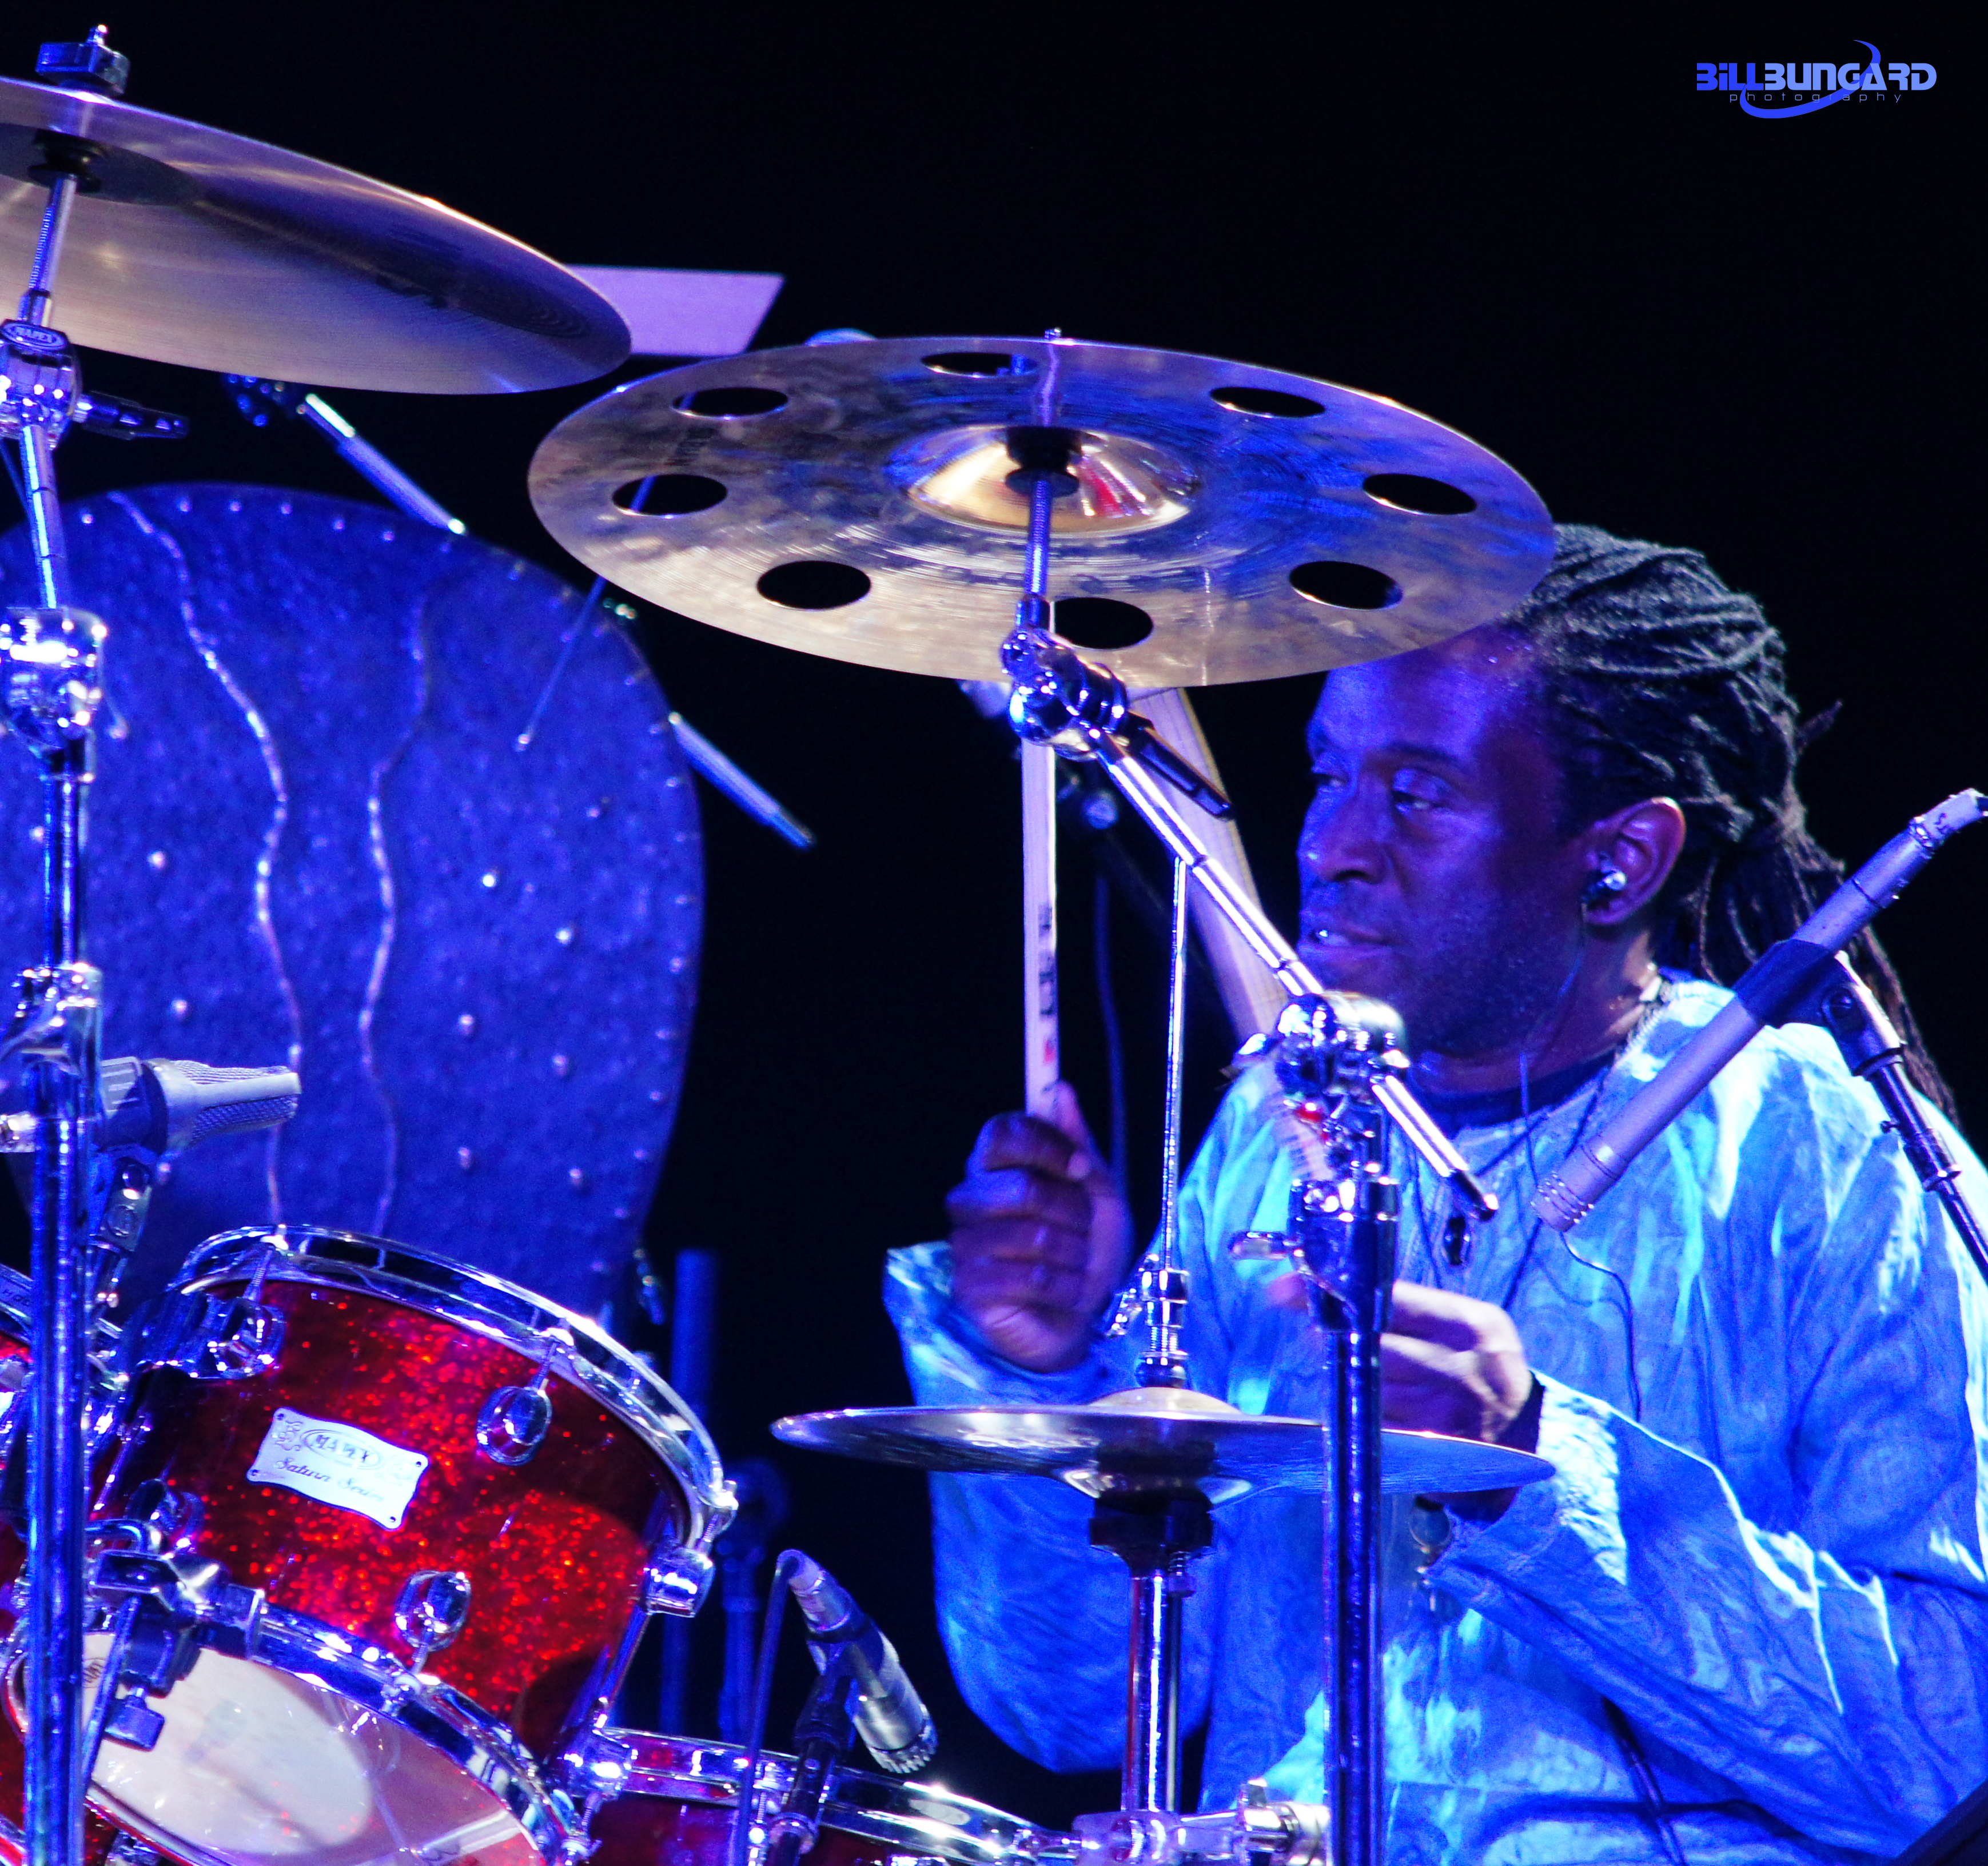 Living Colour @ The Paramount (Photo By Bill Bungard)